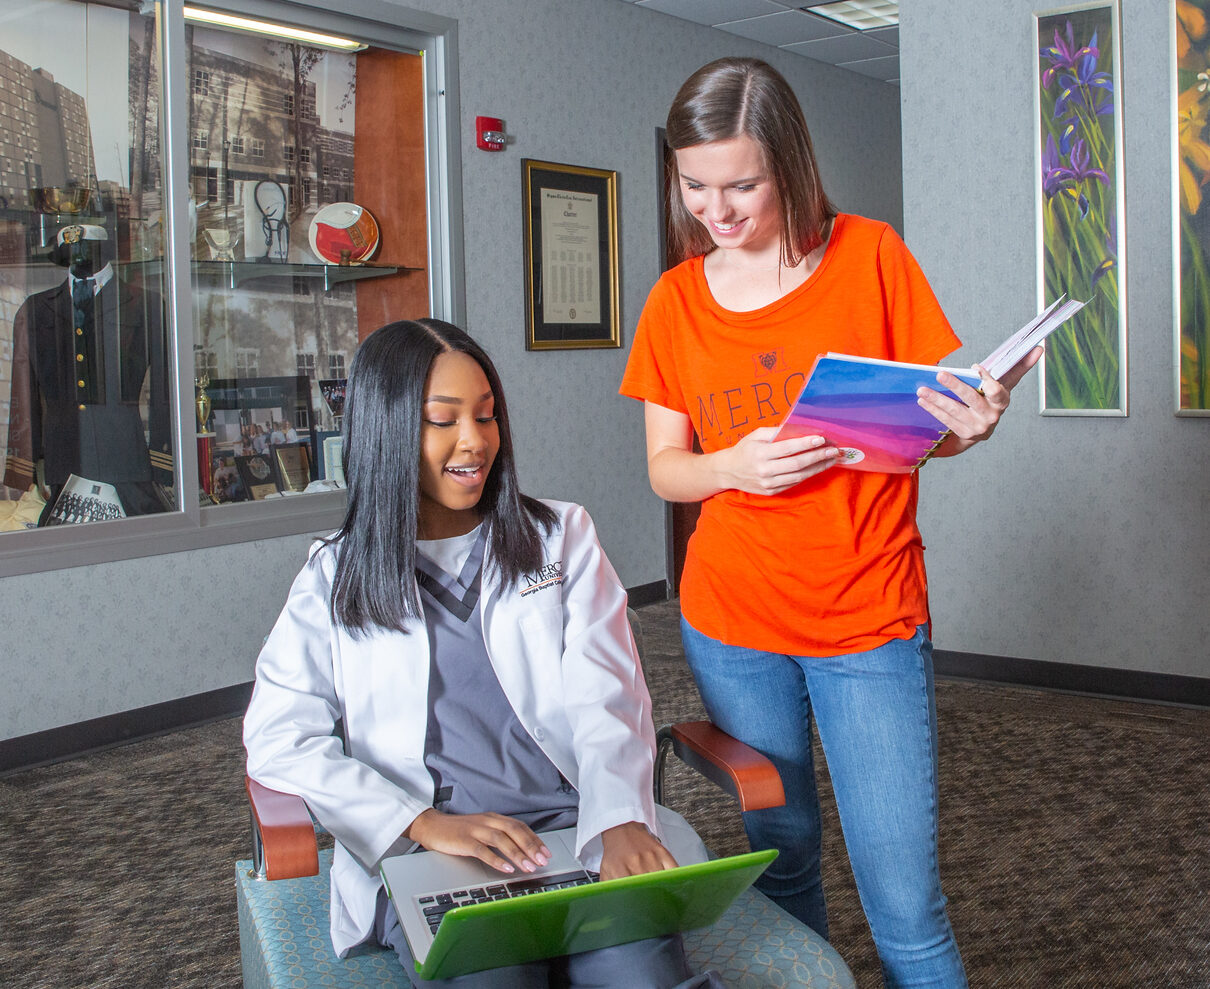 Two nursing students, one in scrubs in chair on laptop, conversing with student in Mercer shirt standing beside sitting student